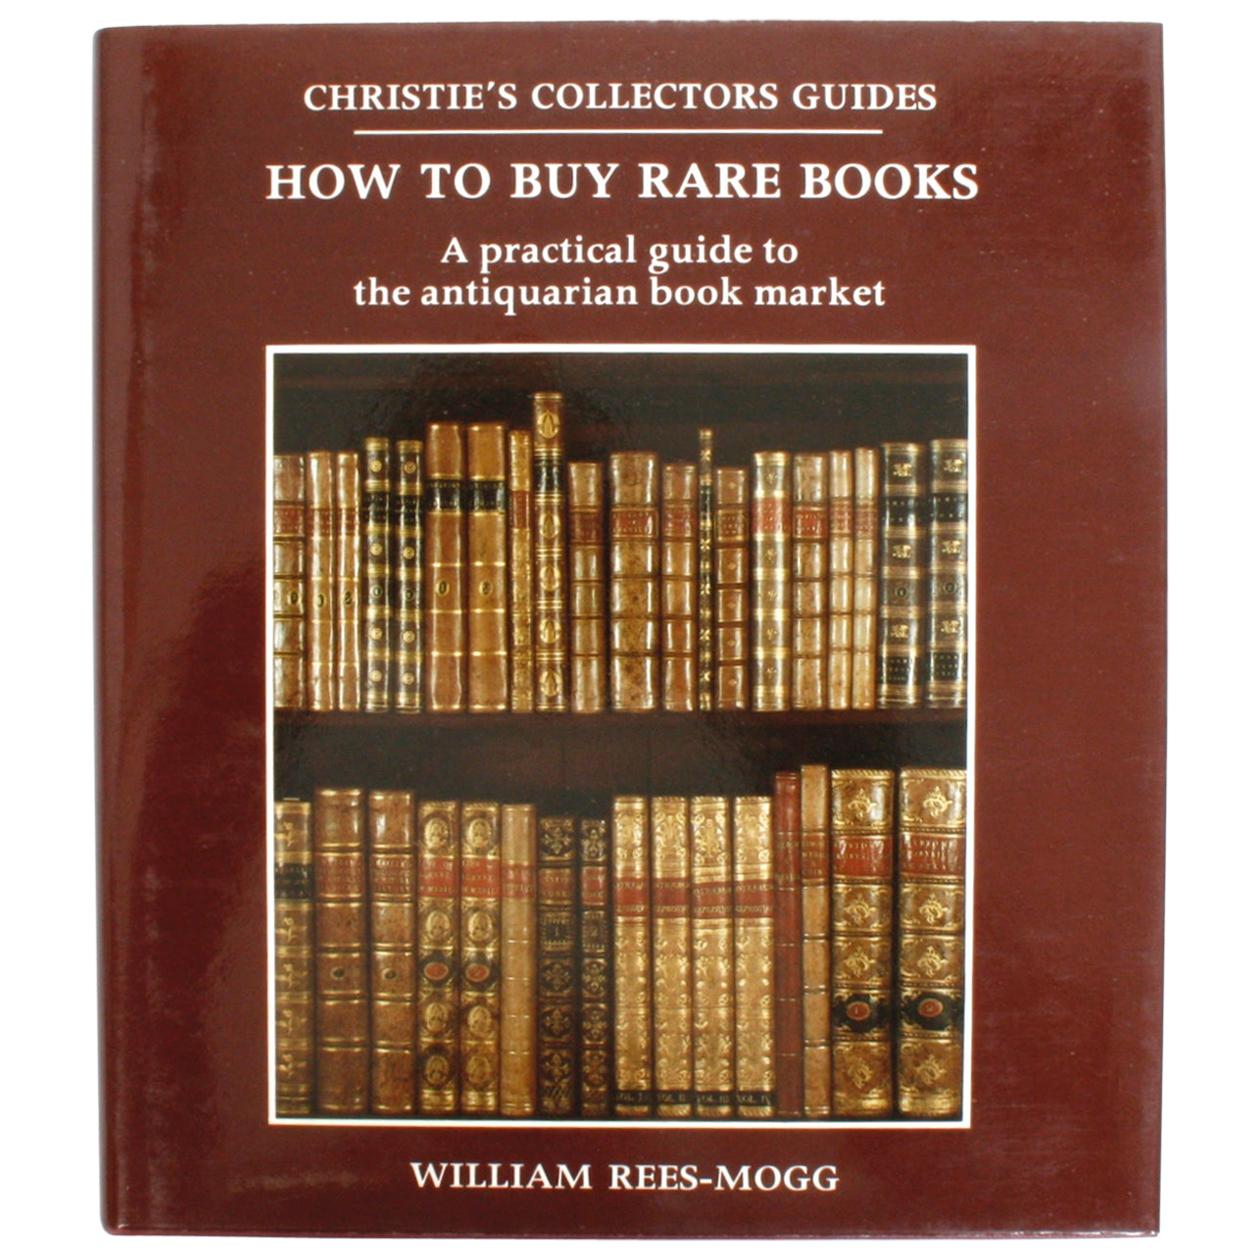 How to Buy Rare Books by William Rees-Mogg, First Edition For Sale